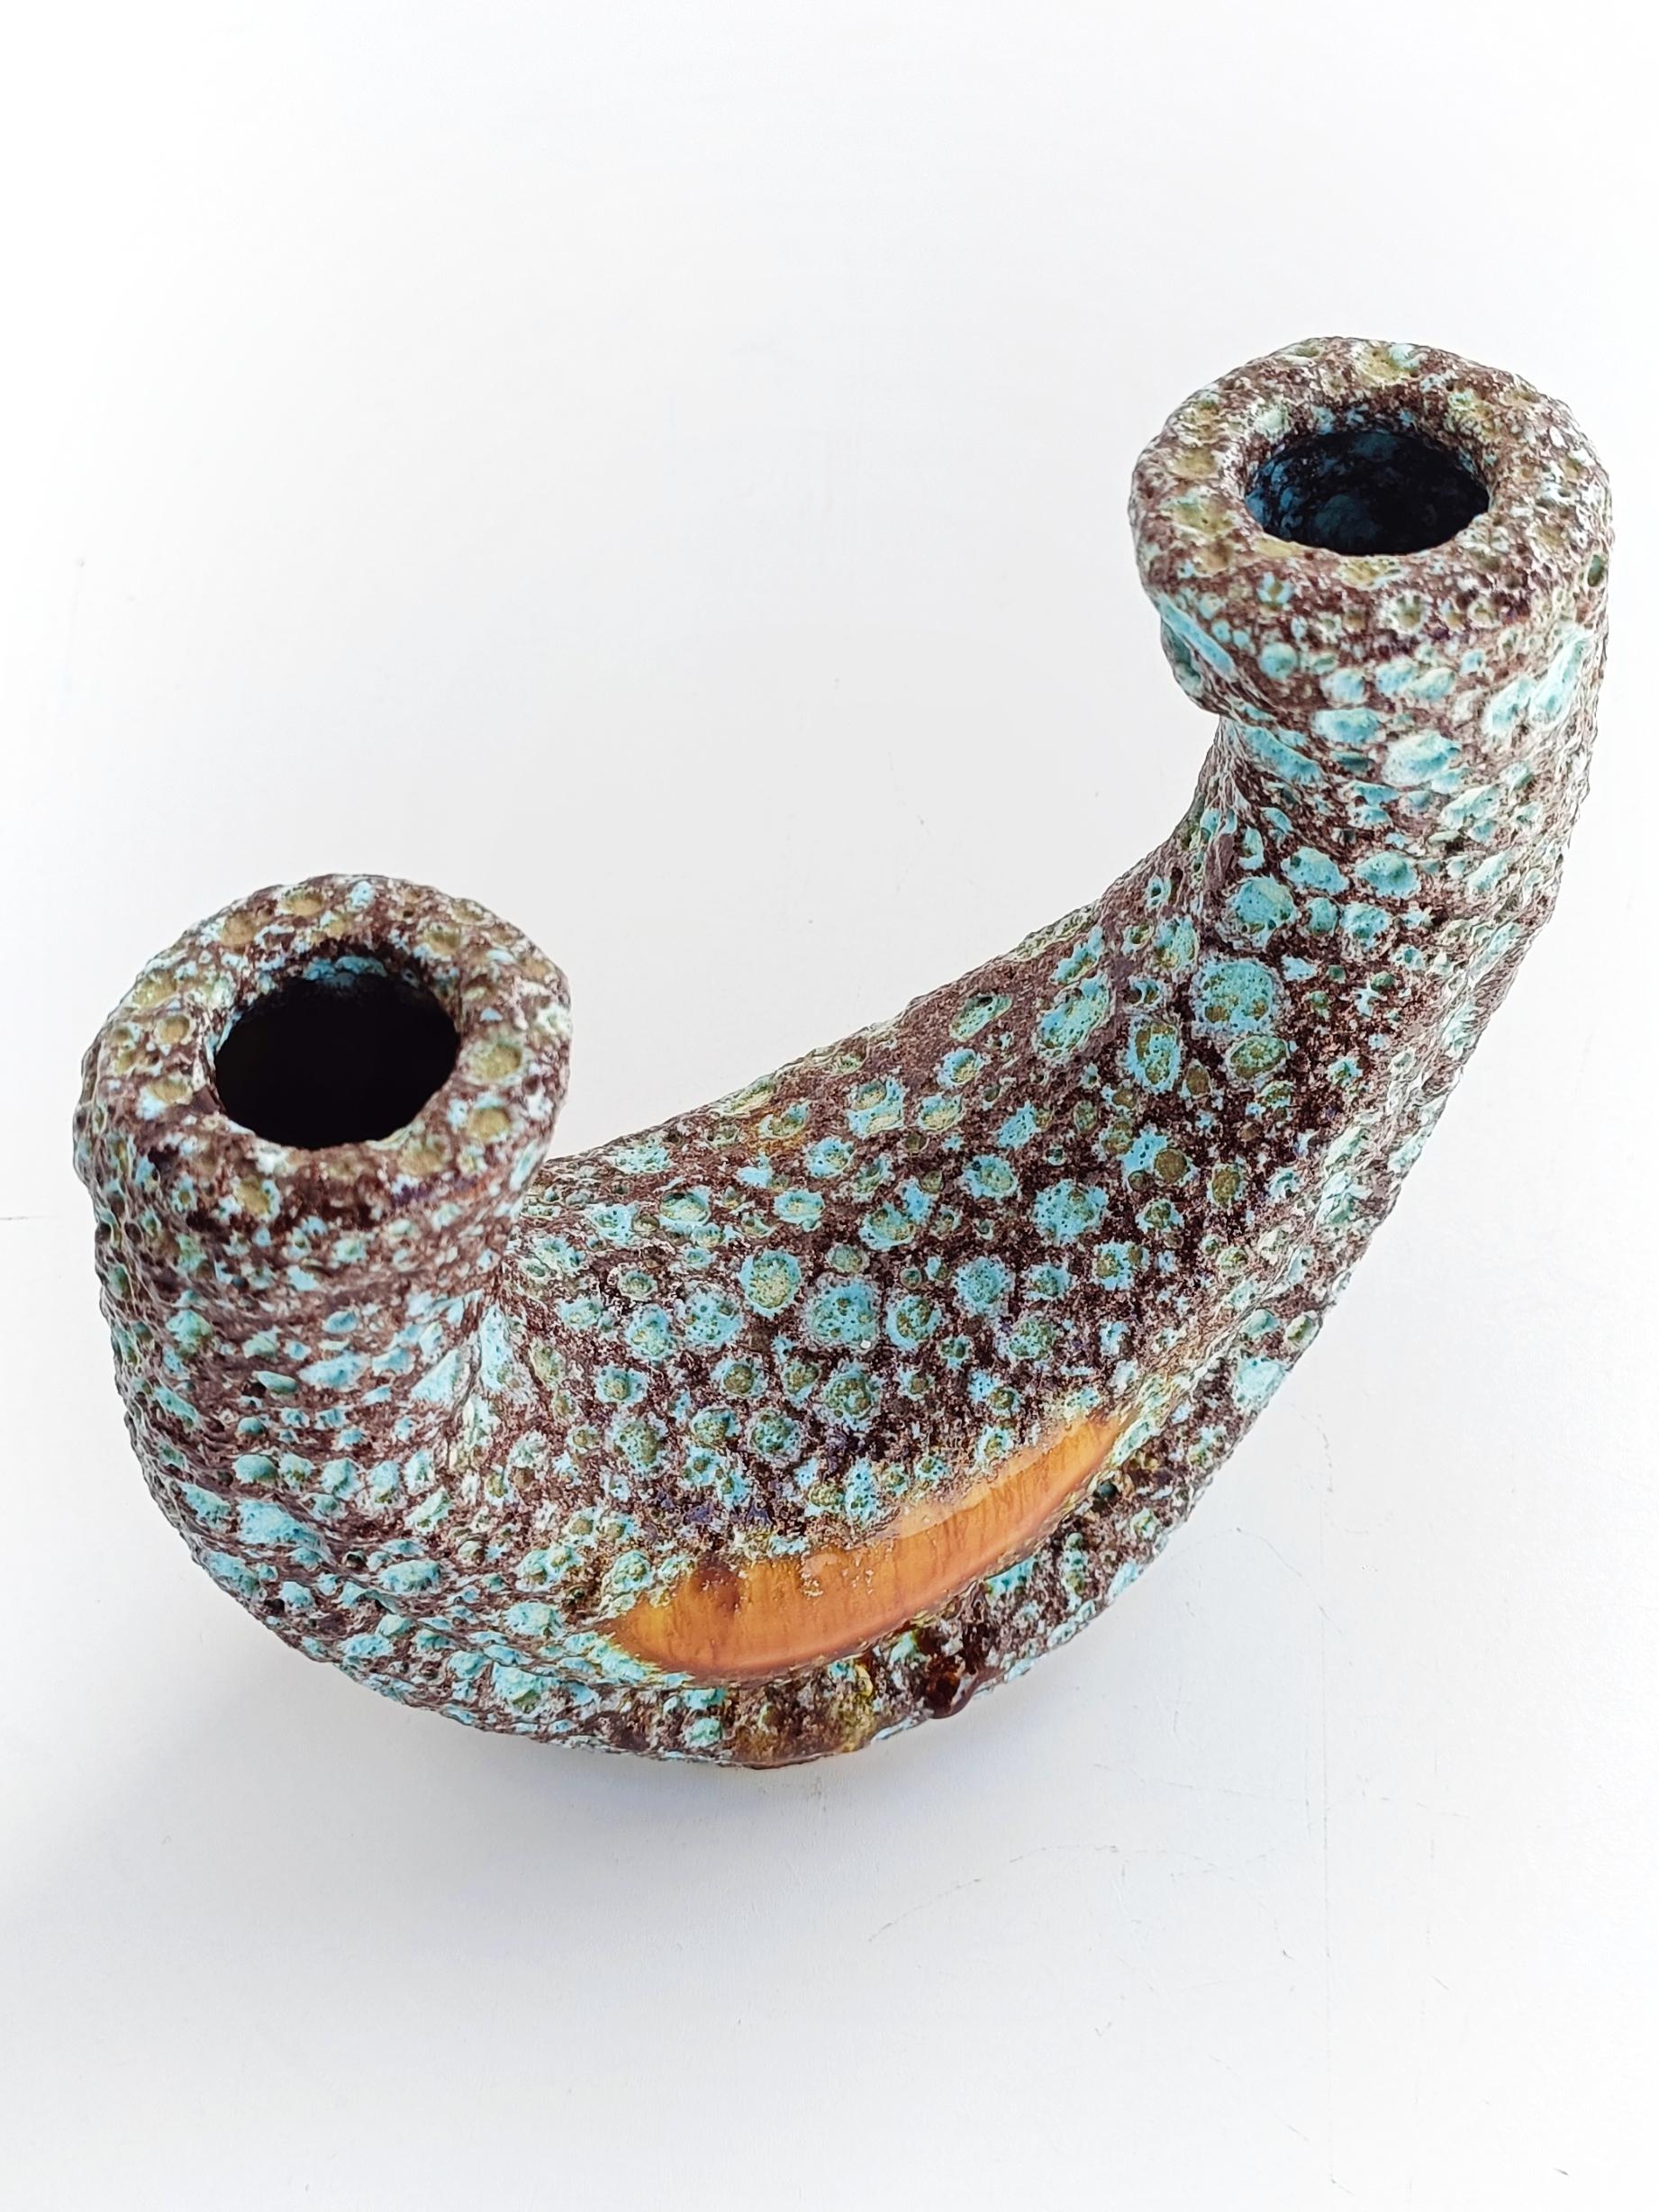 Ceramic French Vallauris Biomorphic Fat Lava Candelabra in The Manner of Georges Jouve For Sale